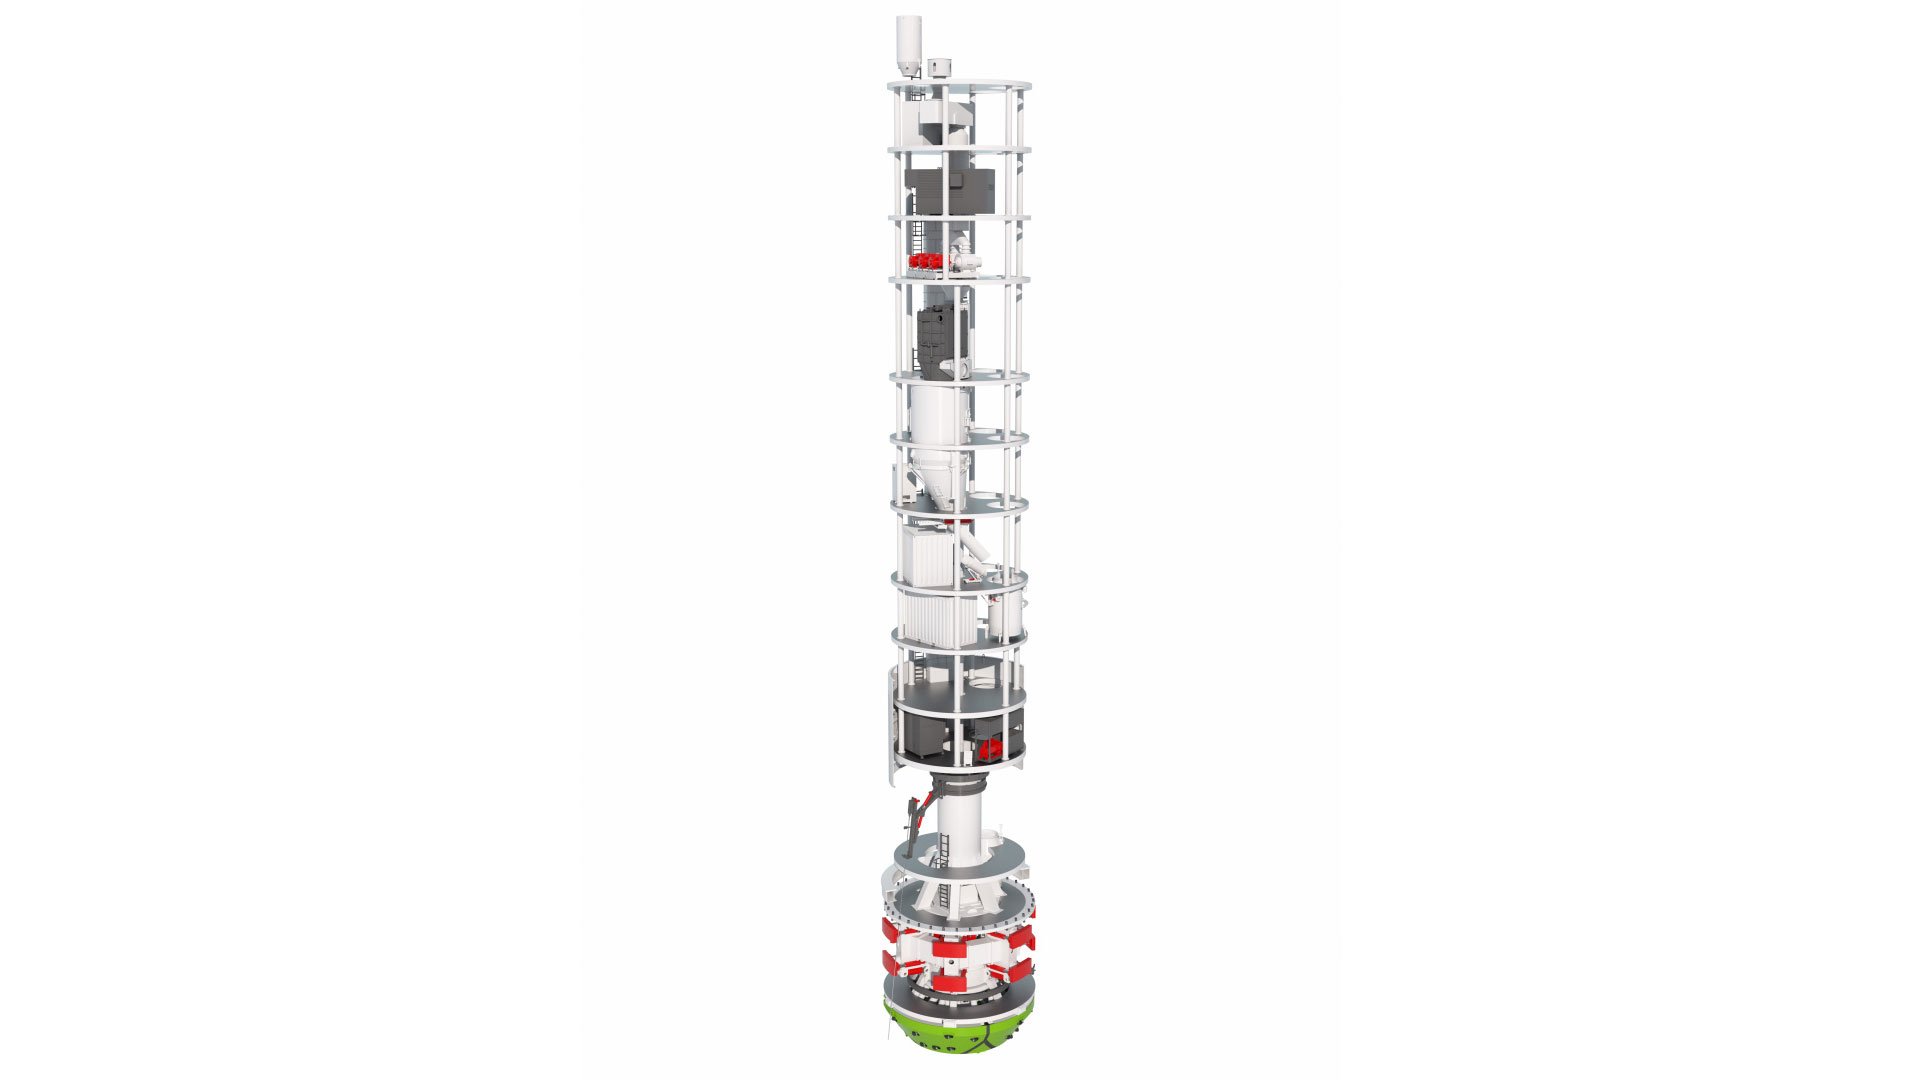 3D illustration of a Shaft Boring Cutterhead in white and red with a green cutterhead